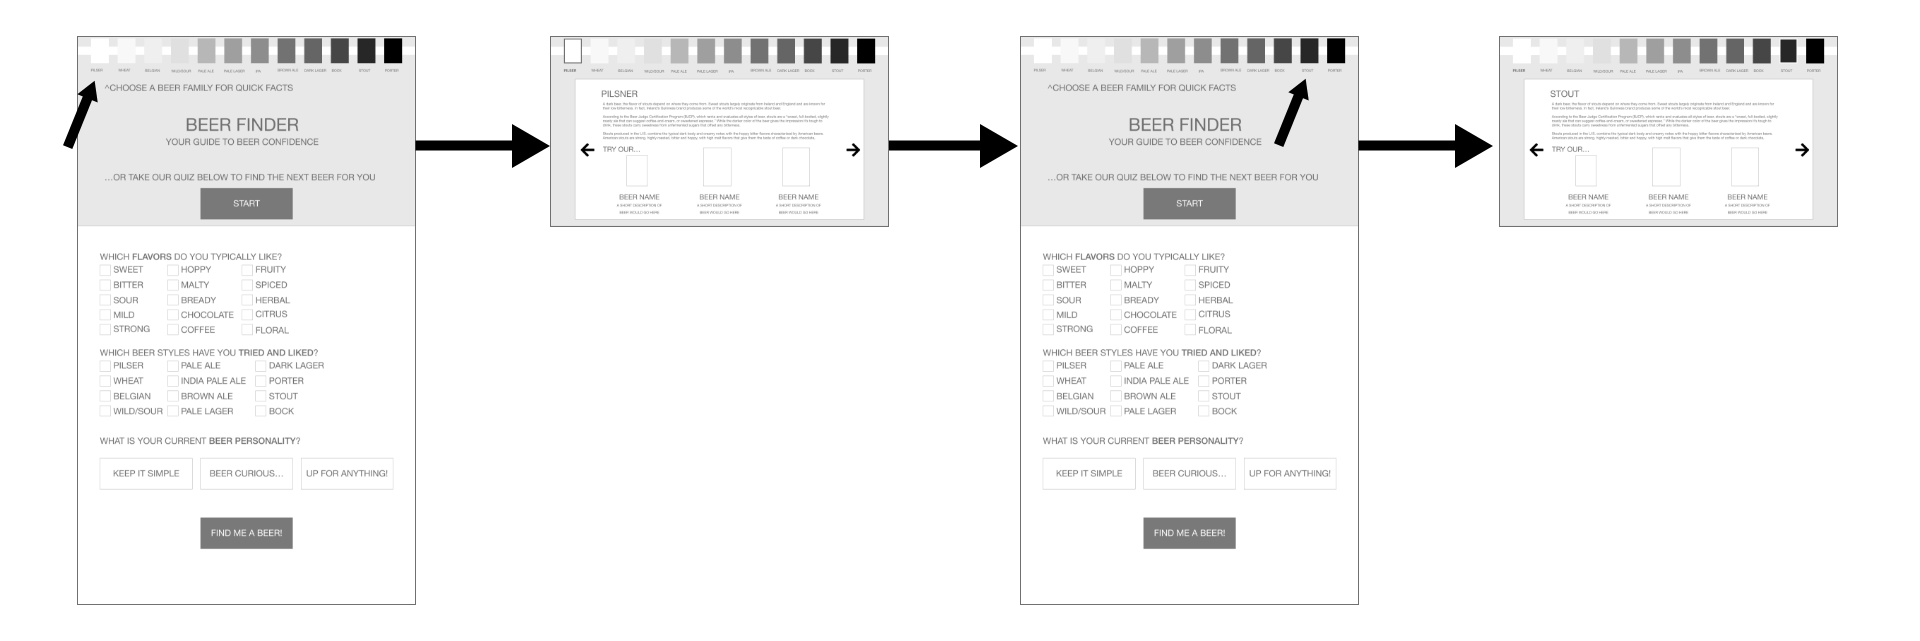 Wireflow for quick facts on beer styles